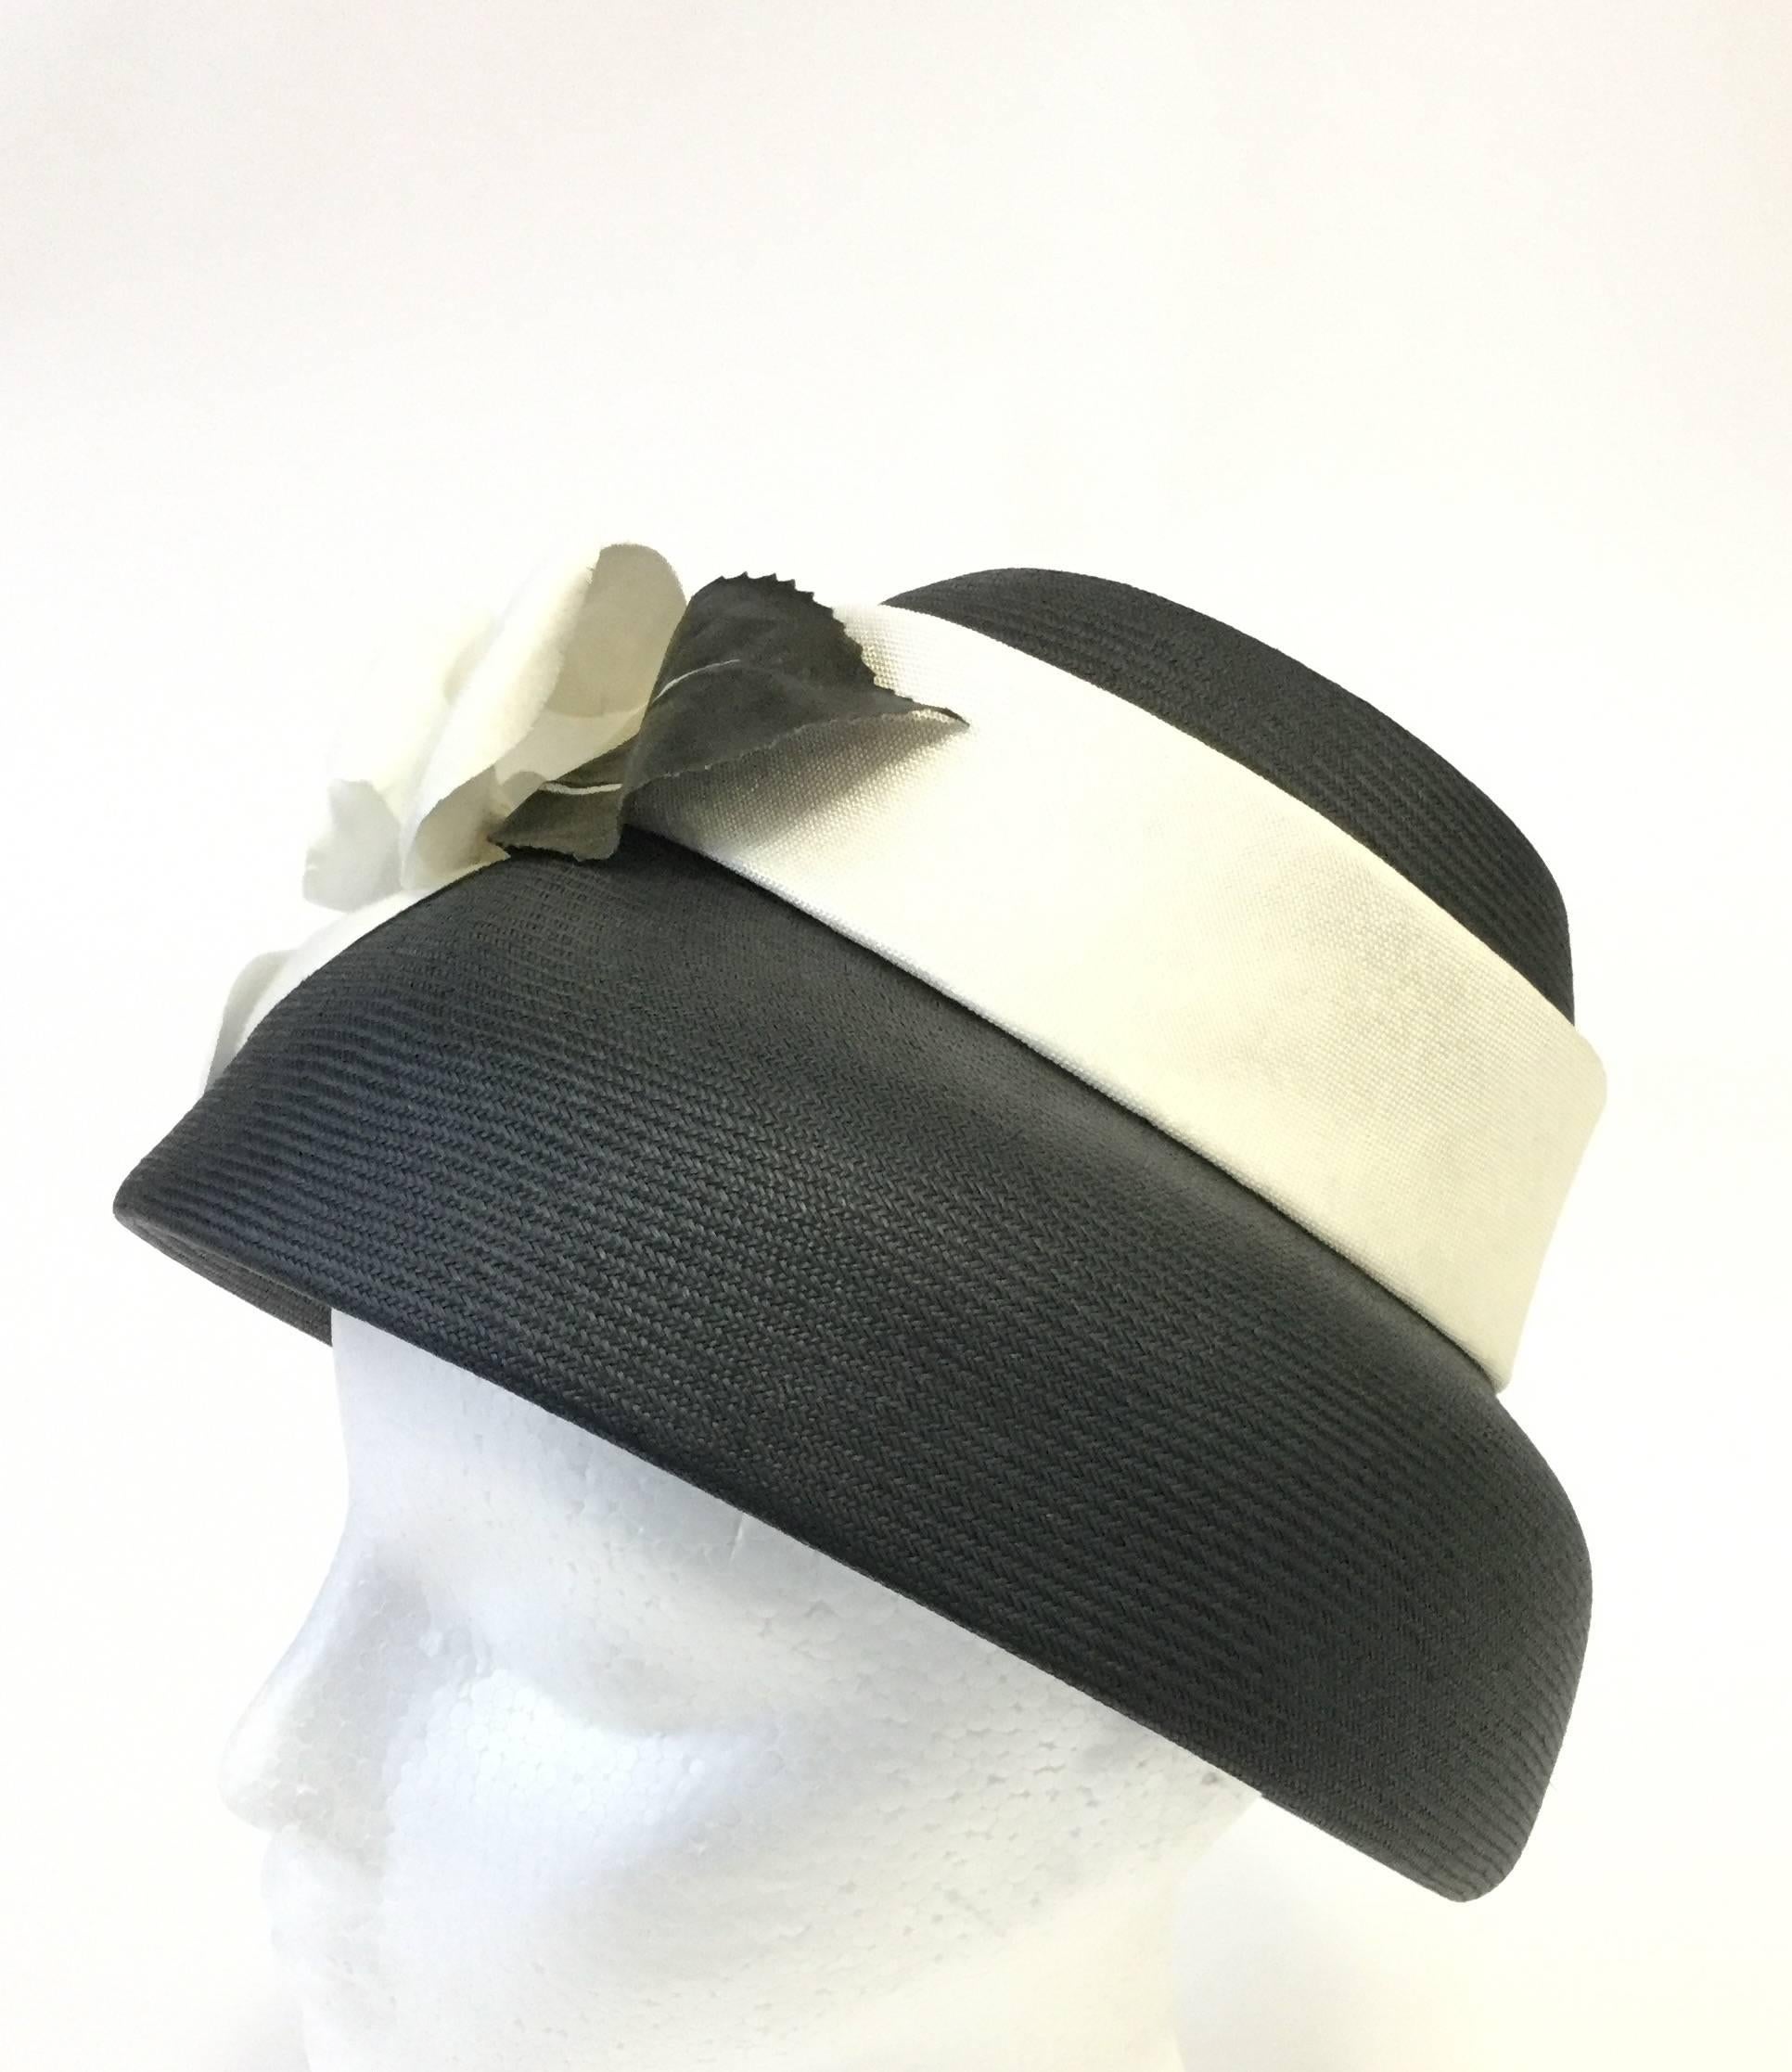 
Sweet and elegant hat by Jan Leslie! This classic hat by Jan Leslie is composed of a black woven mushroom style base with a striking white ribbon wrapped around the crown. Affixed to the ribbon is a large, white magnolia flower with dark leaves.